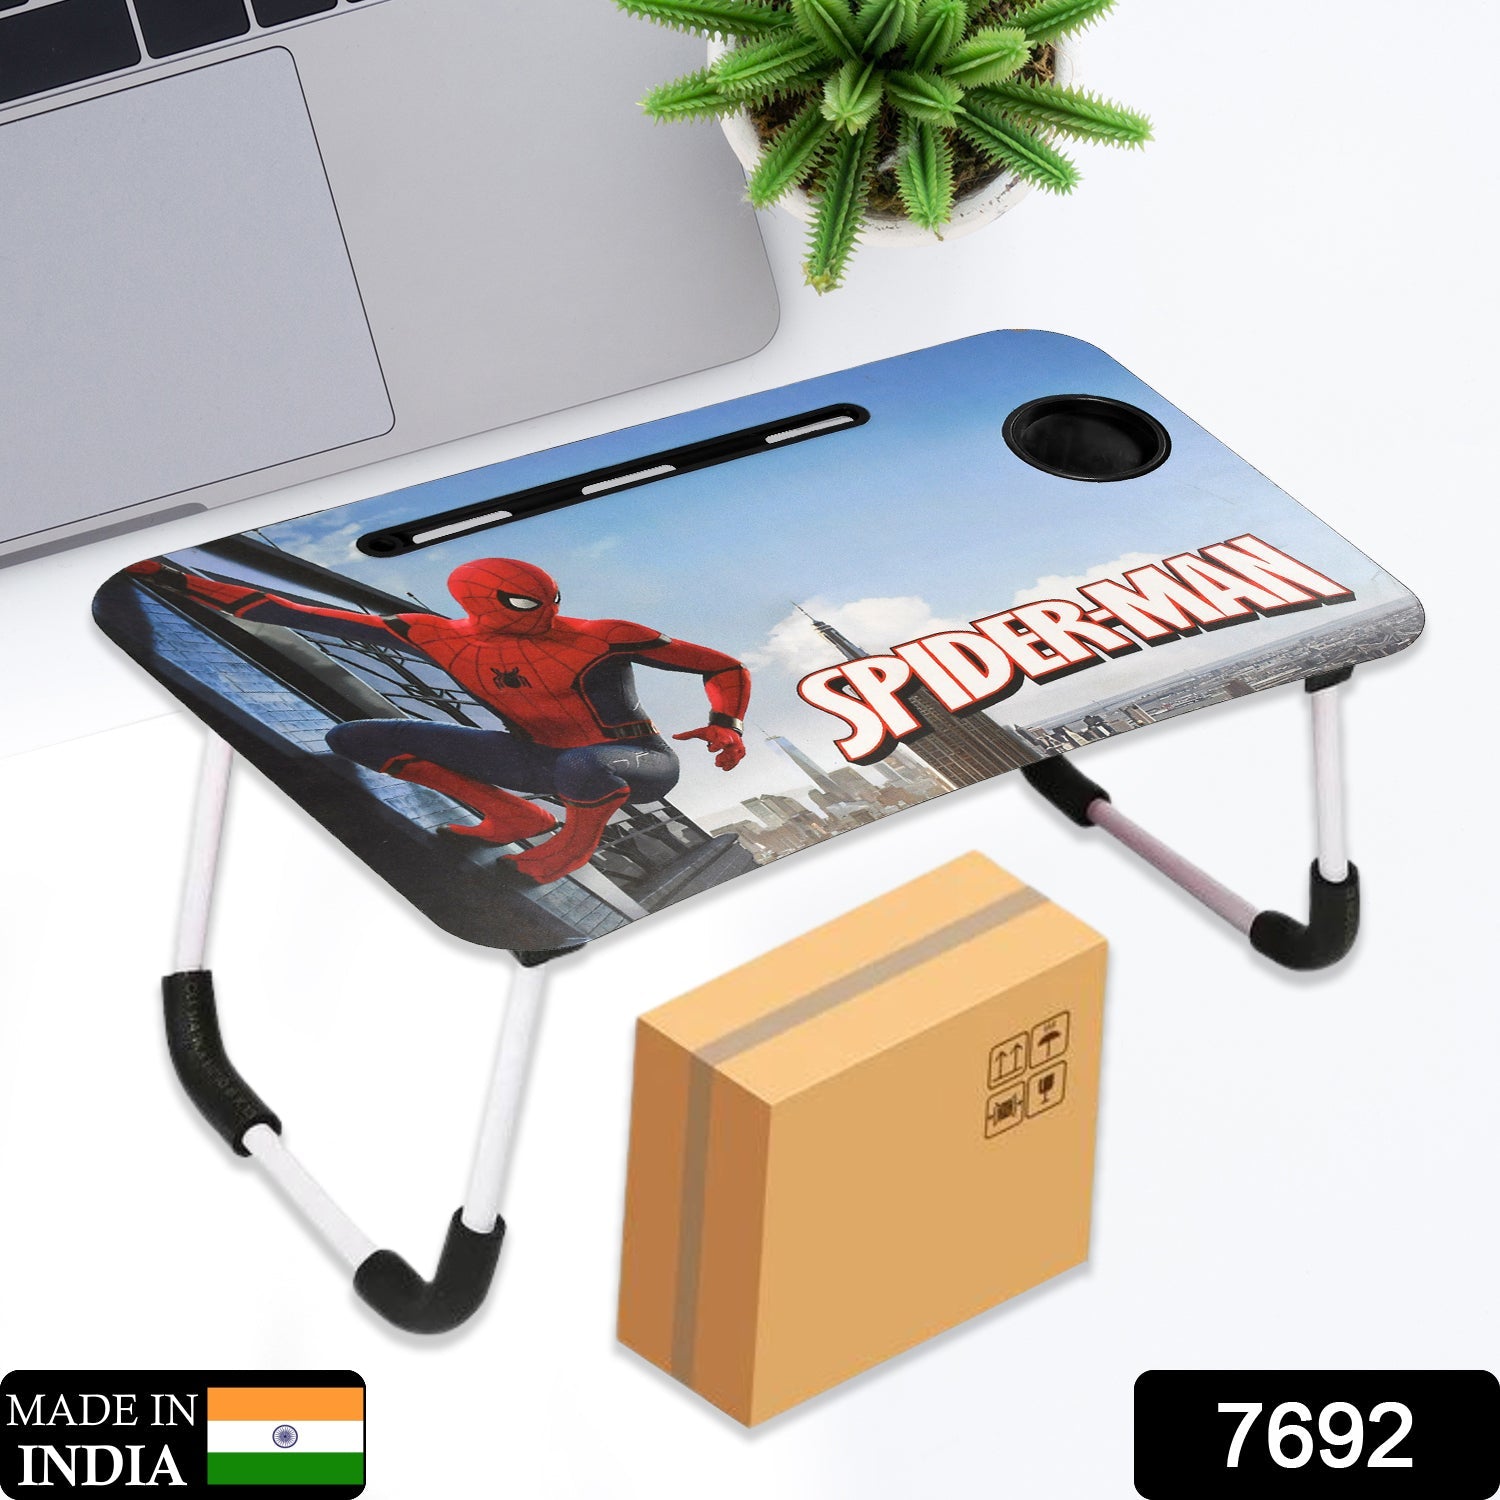 7692 Foldable Laptop Spiderman Printed Table for Adults , Portable Study Table for Kids, Work from Home Lapdesk with Tablet Holder and Cupholder Table DeoDap